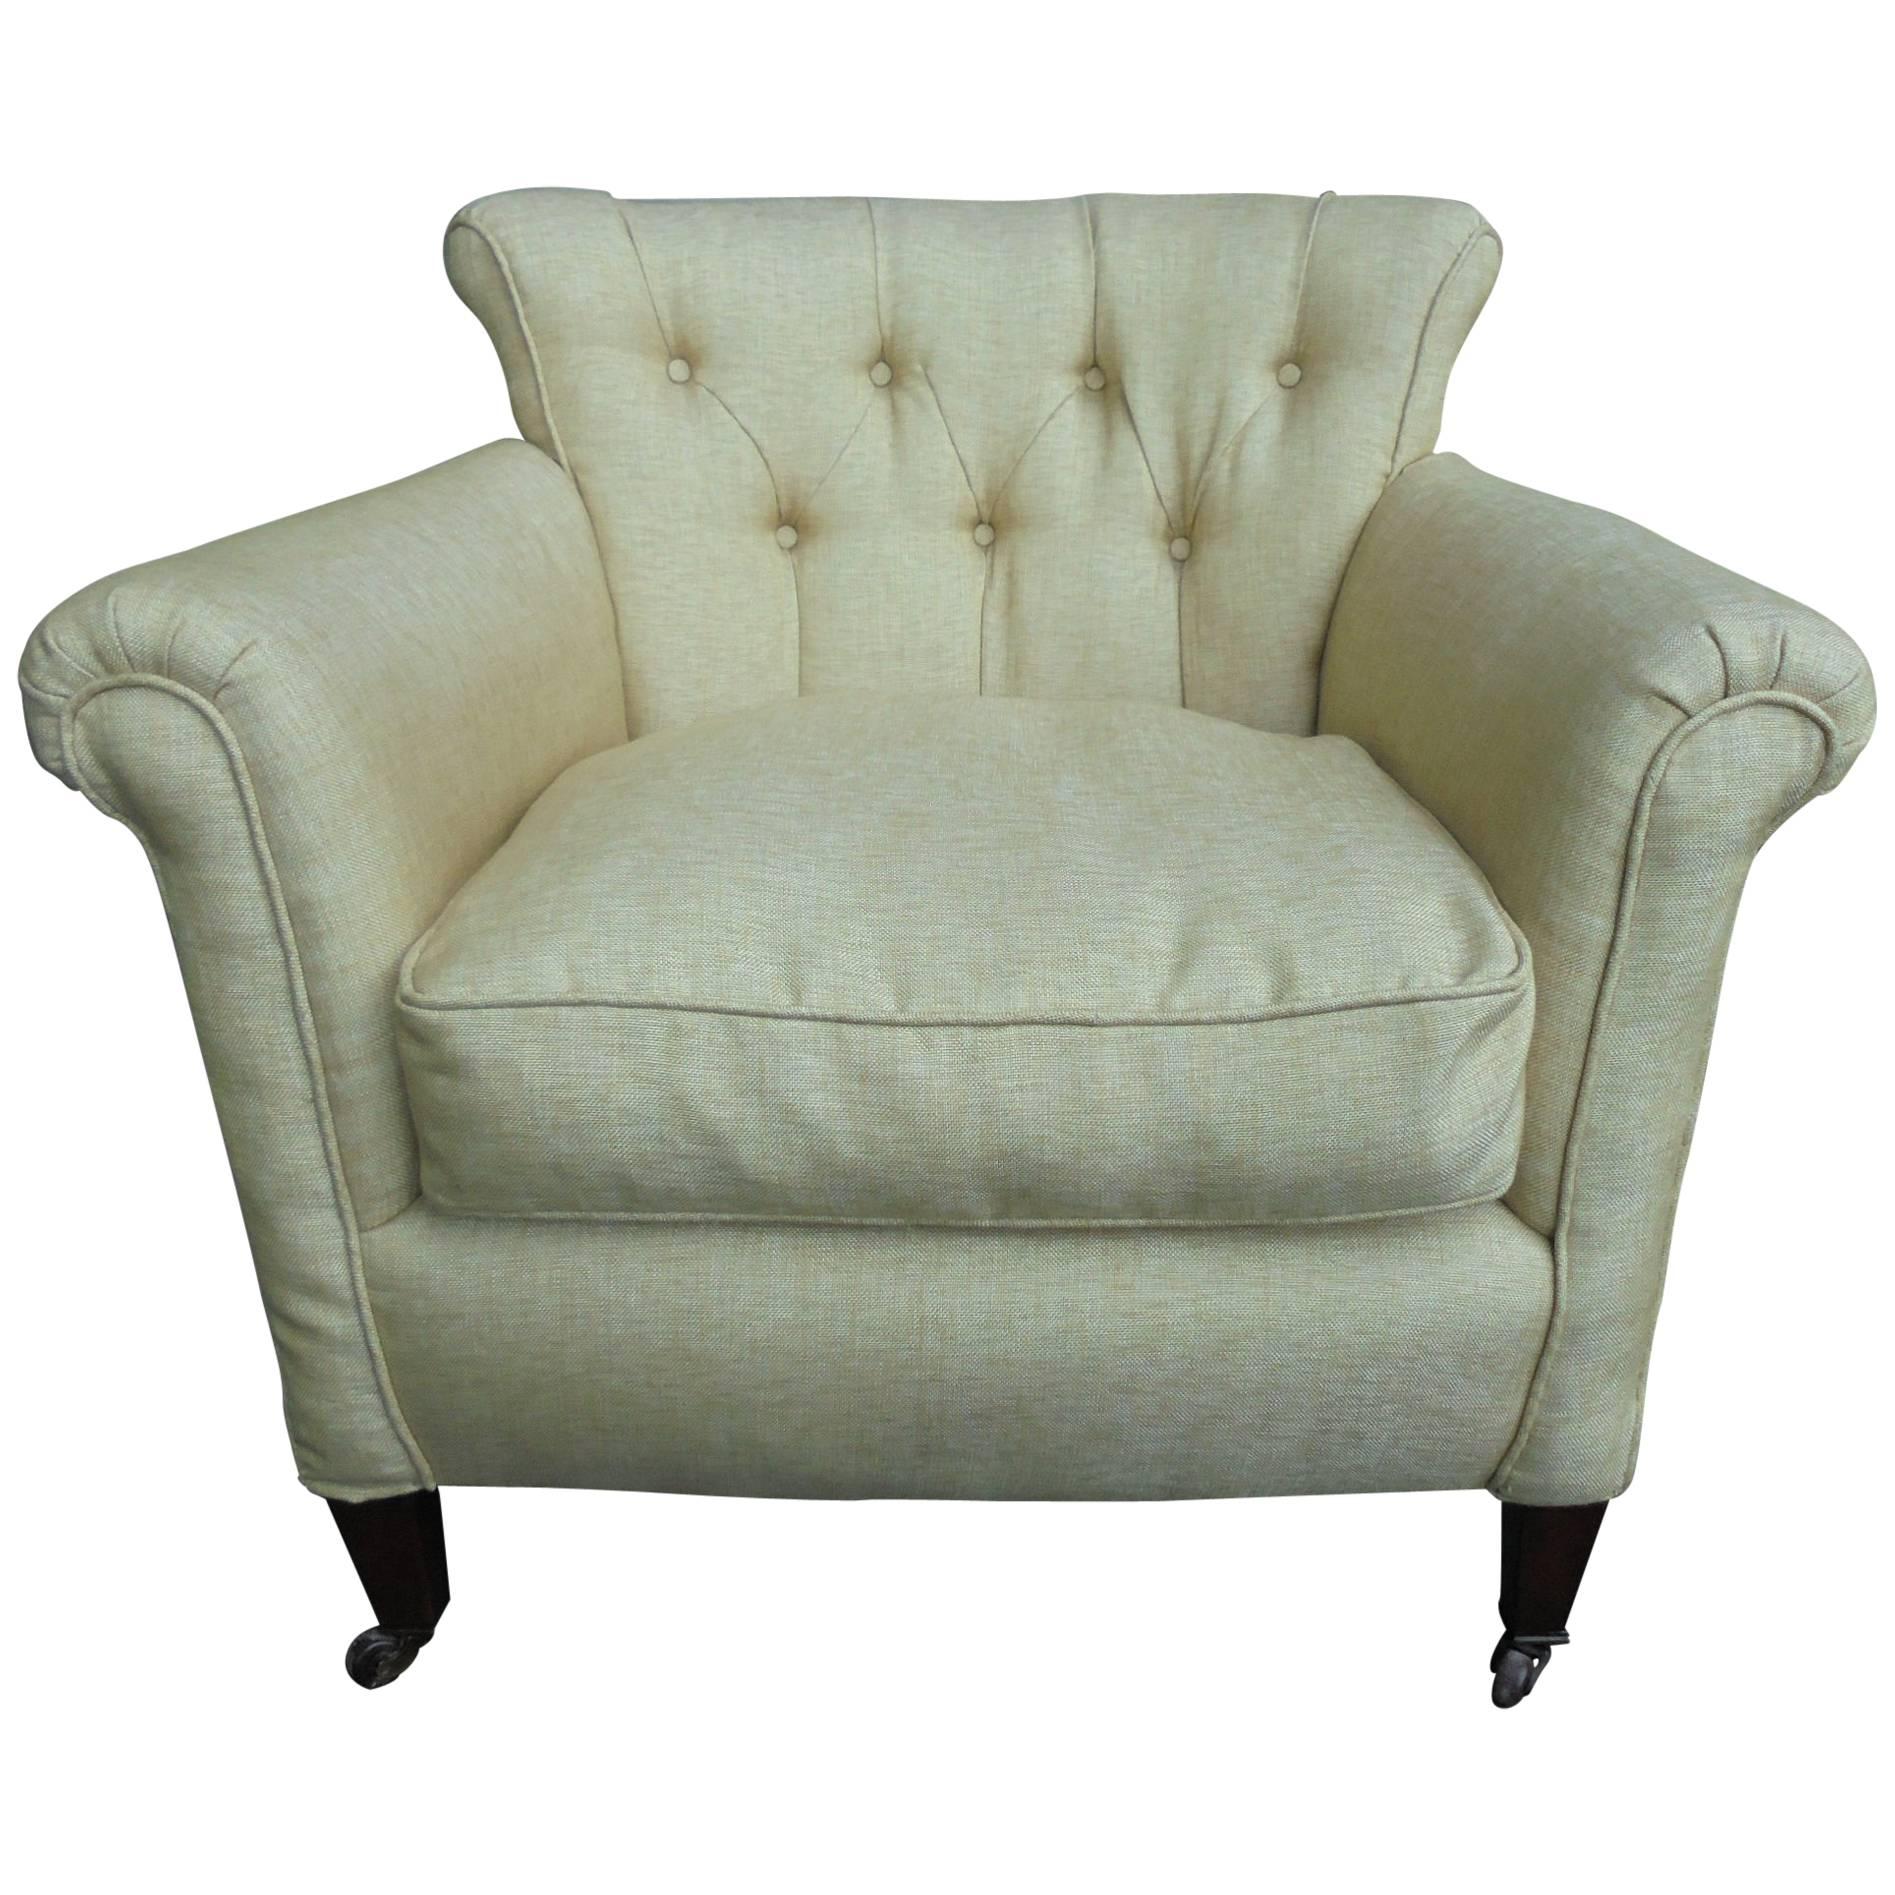 Antique English Upholstered Armchair For Sale